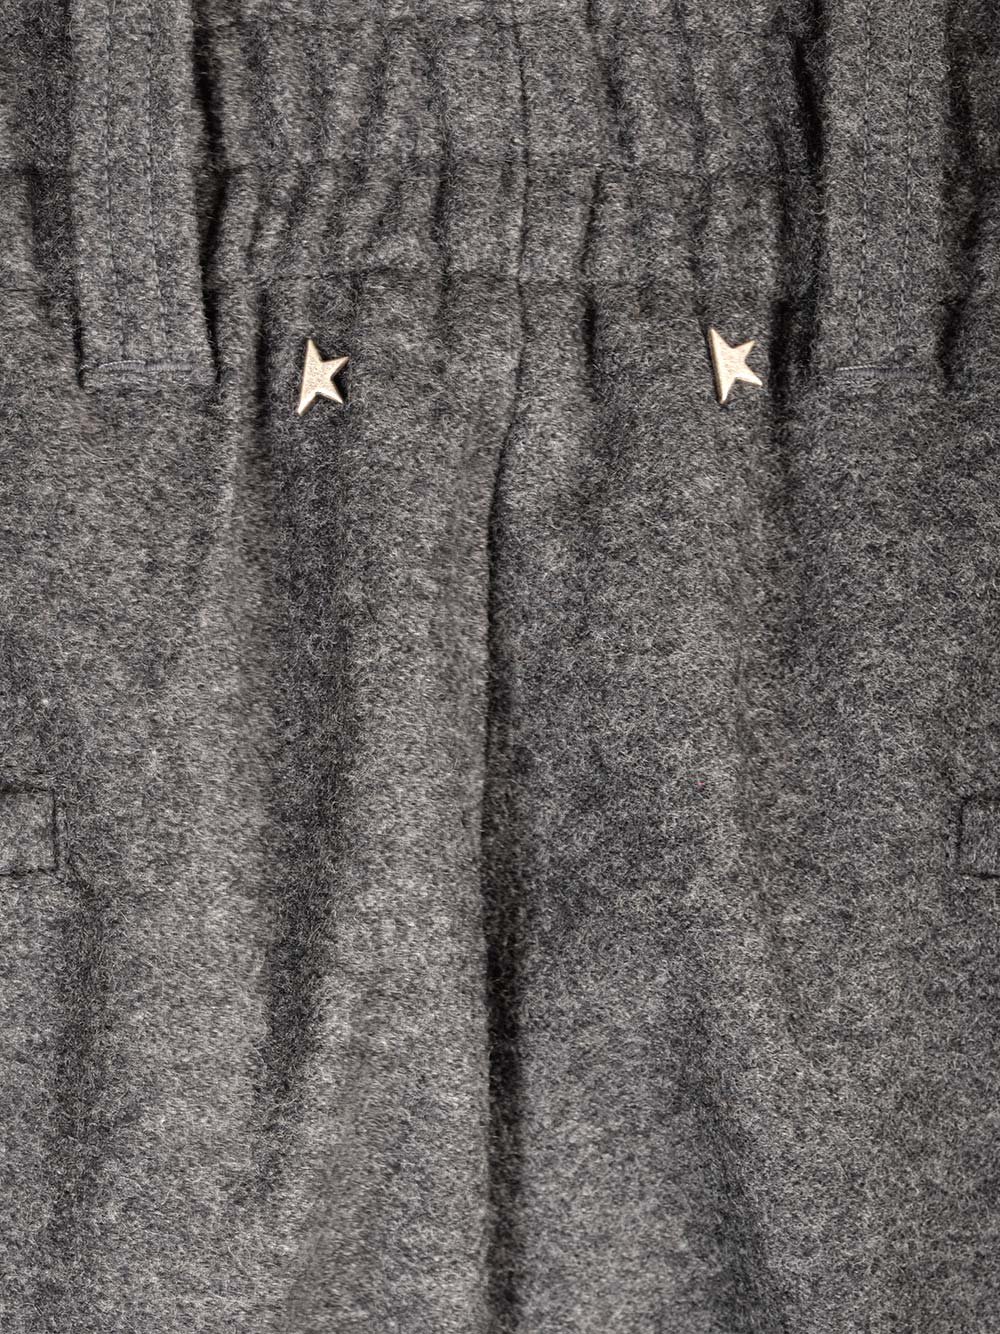 Shop Golden Goose Wool Trousers In Charcoal